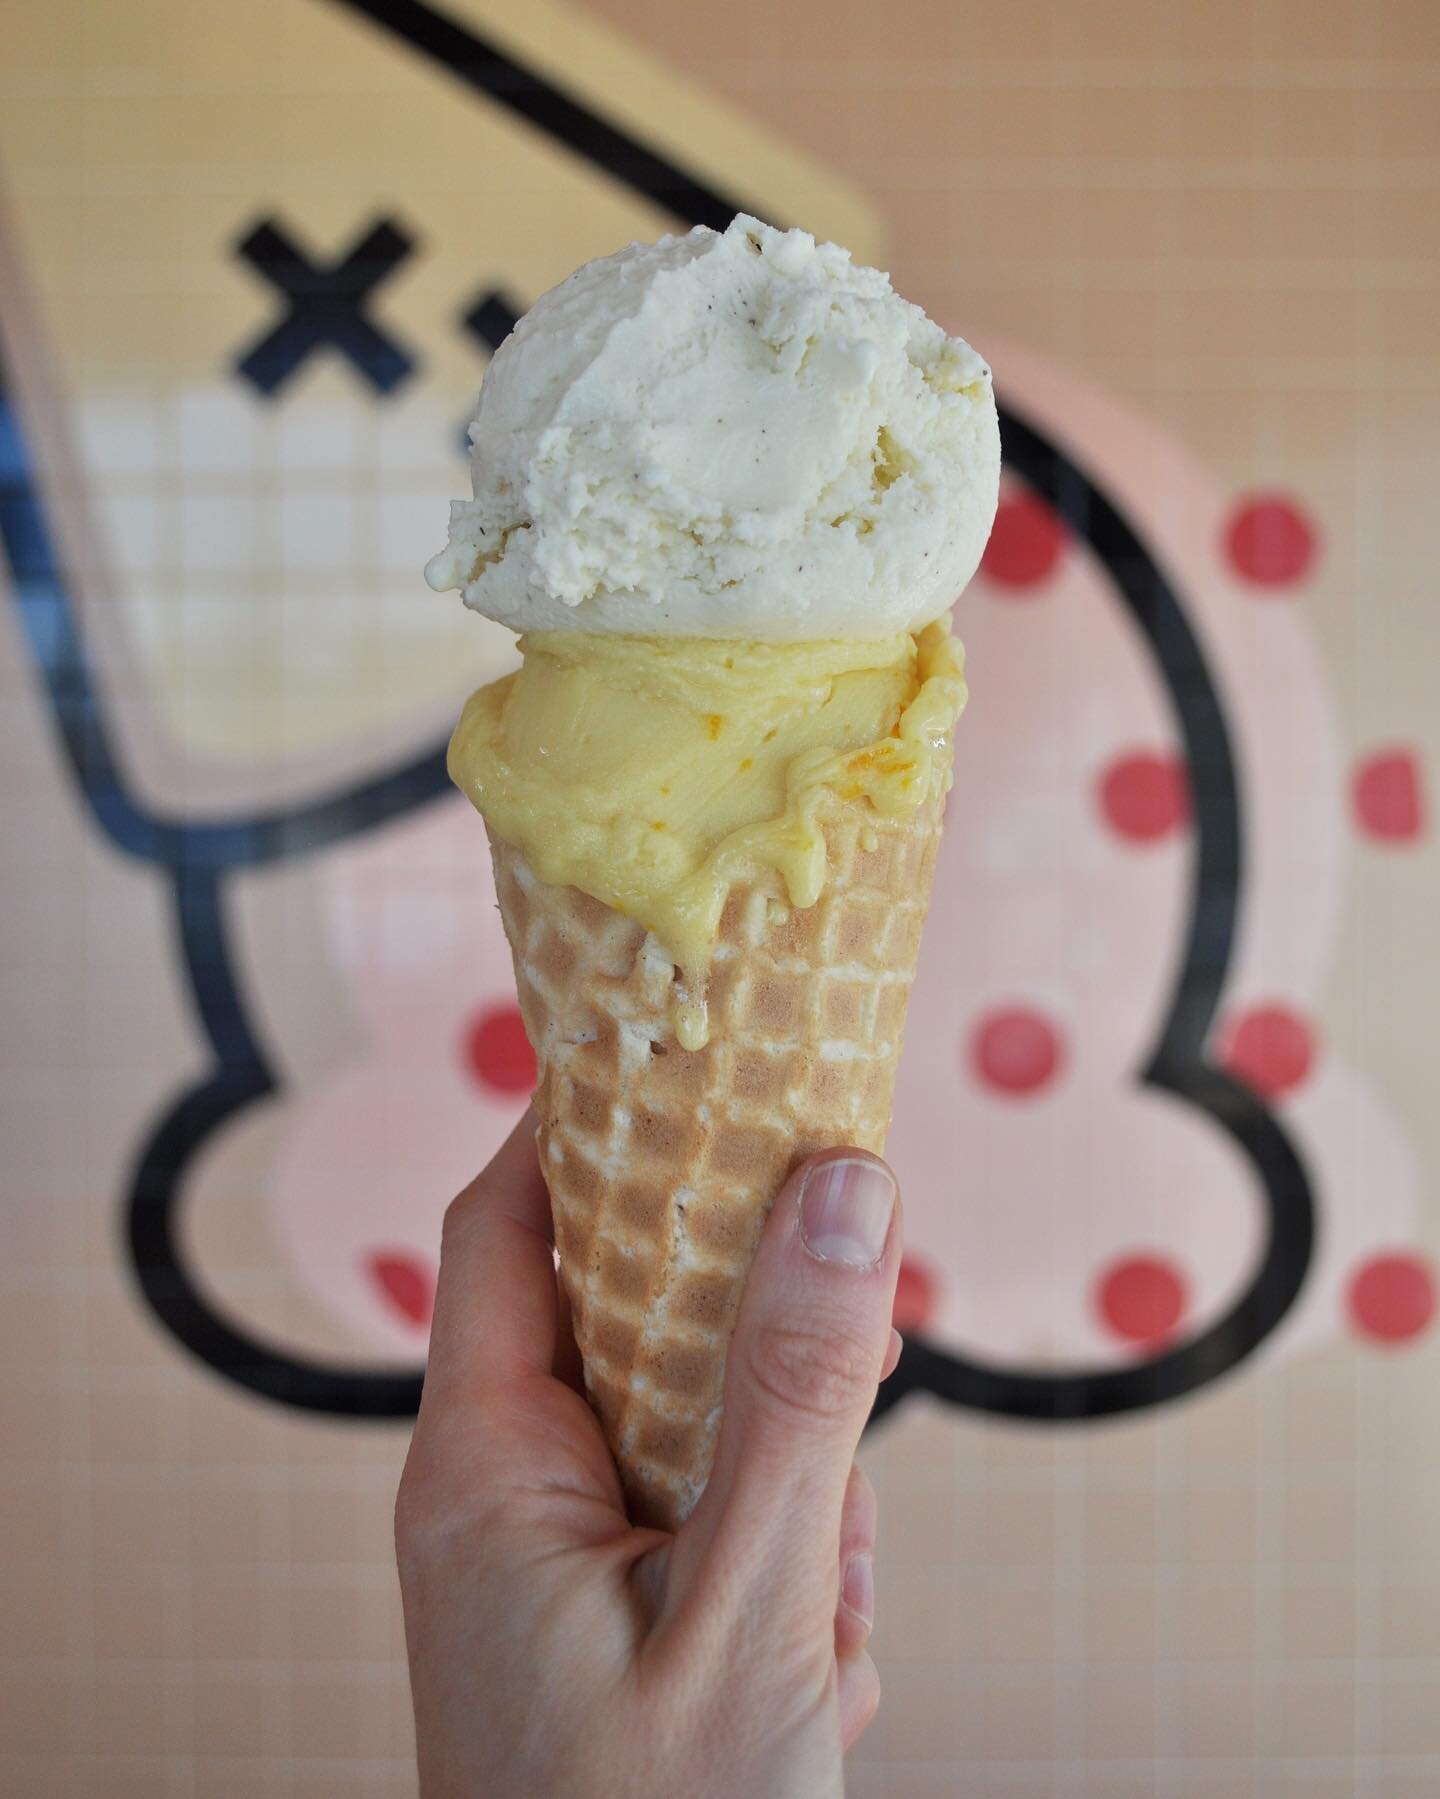 XO&rsquo;s tip of the day: combine a scoop of ORANGE BLOSSOM sorbet with a scoop of VANILLA BEAN for the ultimate, deconstructed creamsicle experience! 🍊
.
.
.
#xoicecream #madewithlove #yycicecream #eatlocalyyc #yycfoodies #yycmom #bestofcalgary